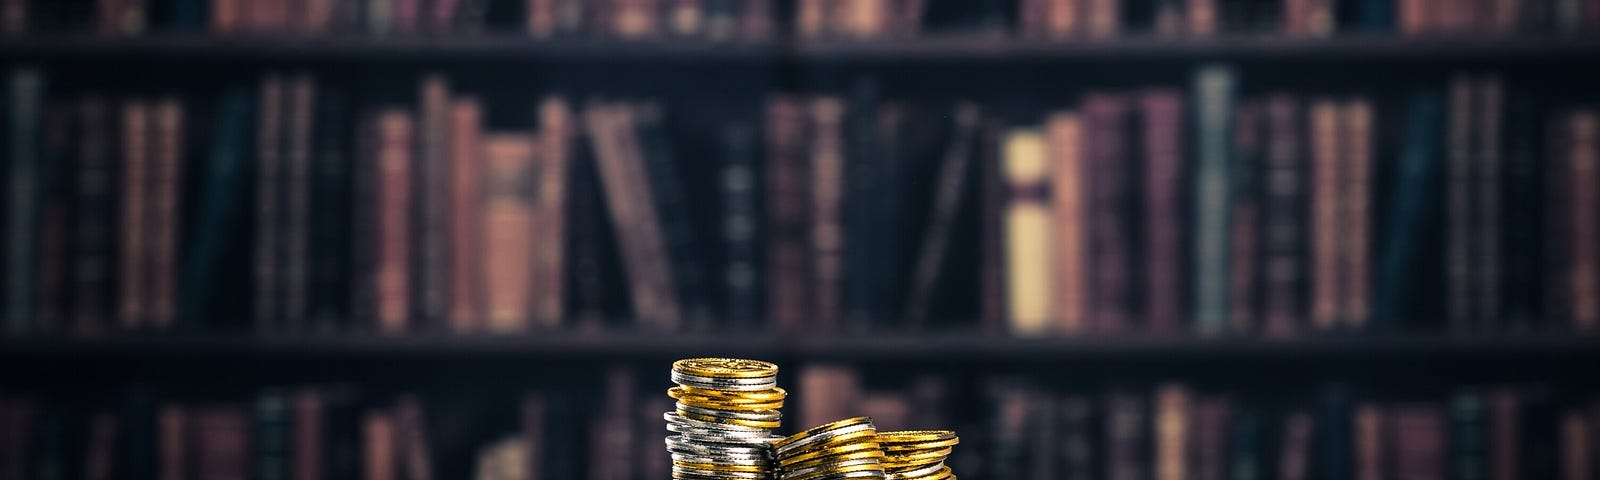 Stacks of coins sitting on top of an open book, on a table with a full bookshelf in the background